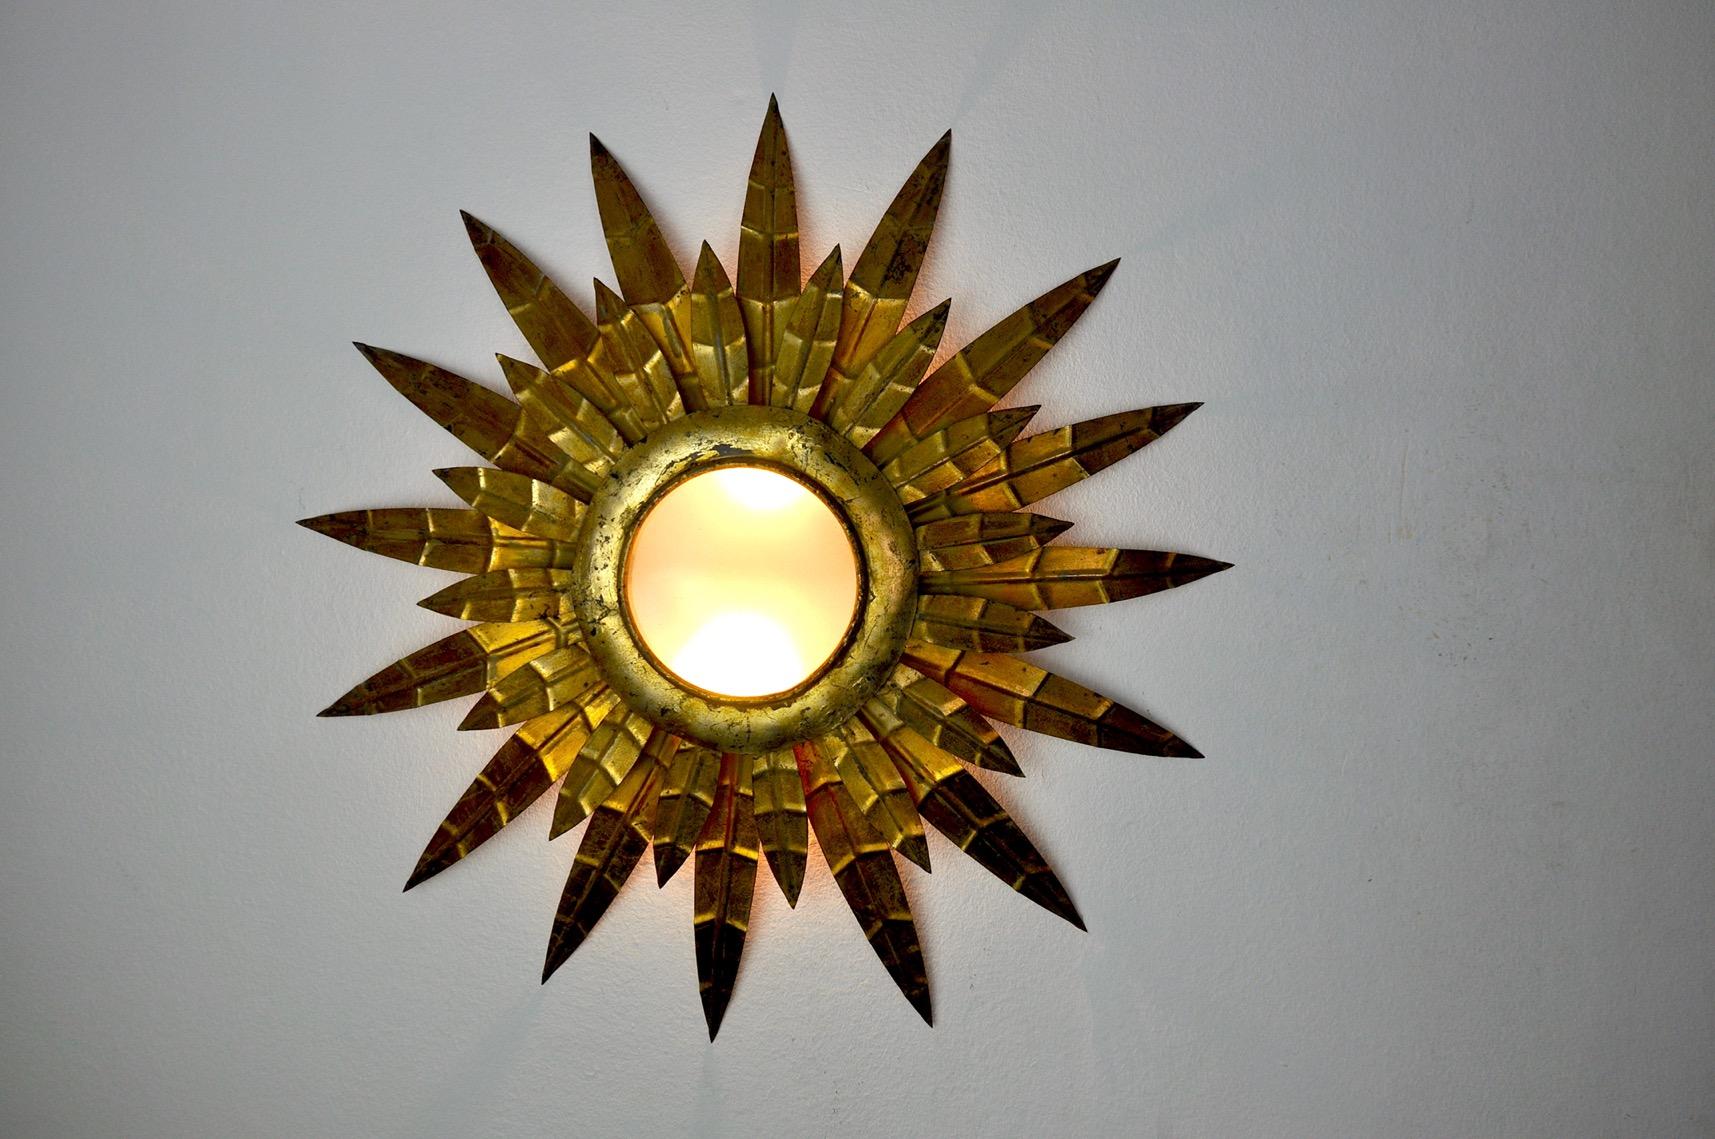 Superb and rare wall lamp or ceiling lamp sun, designated and produced in italy in the 1970s.

This unique object is composed of golden metal sheets in a floral theme.

Object that will illuminate wonderfully and bring a real design touch to